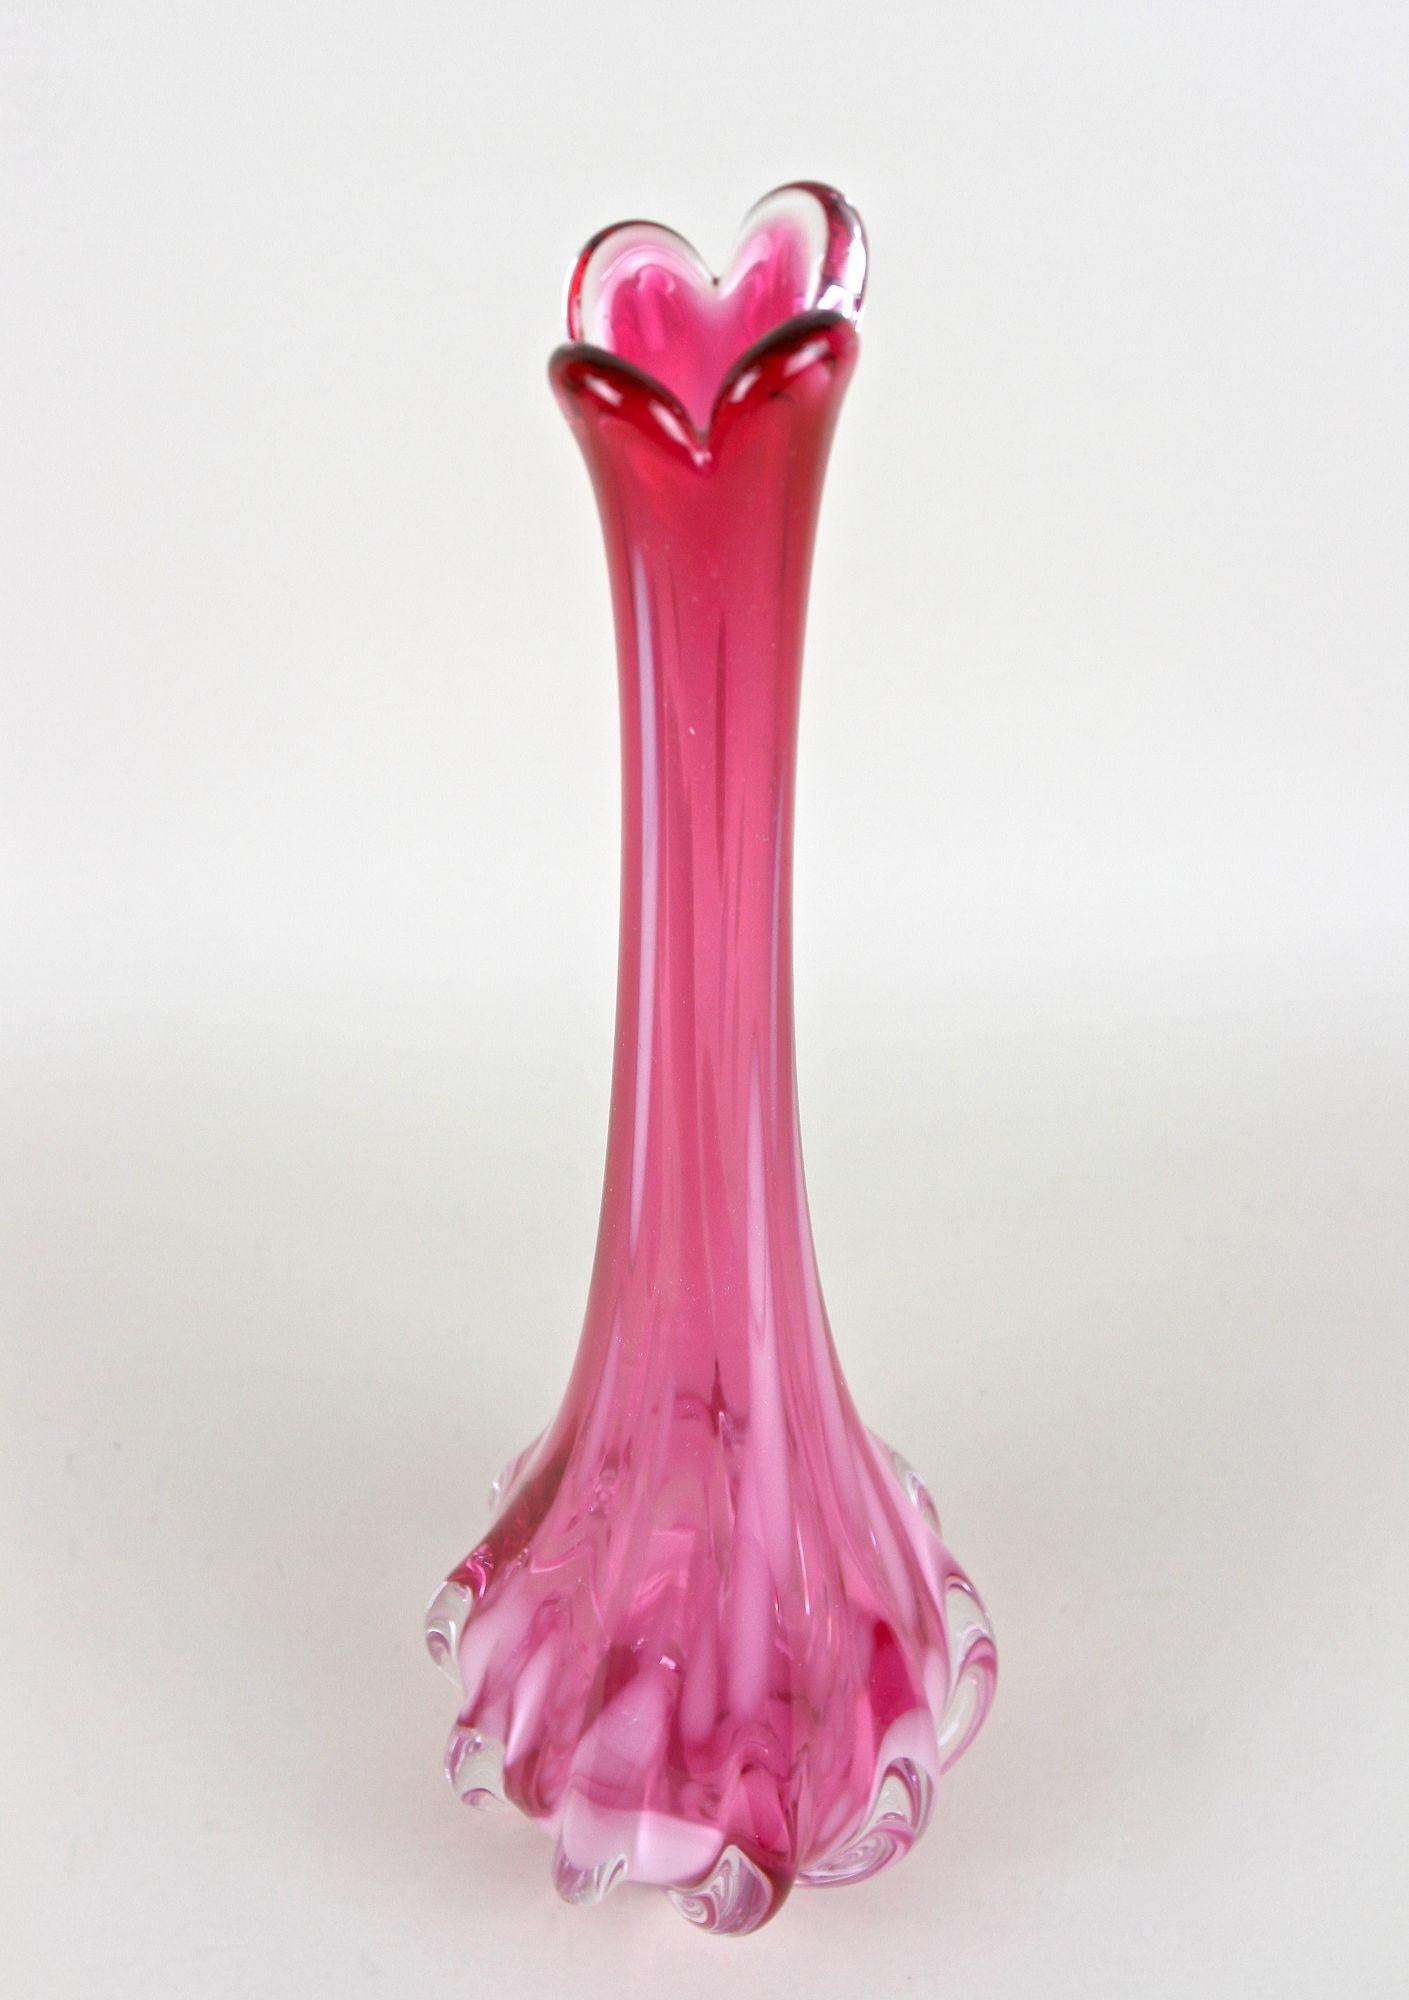 Pink Long Neck Murano Glass Vase, 20th Century, Italy circa 1970 For Sale 2